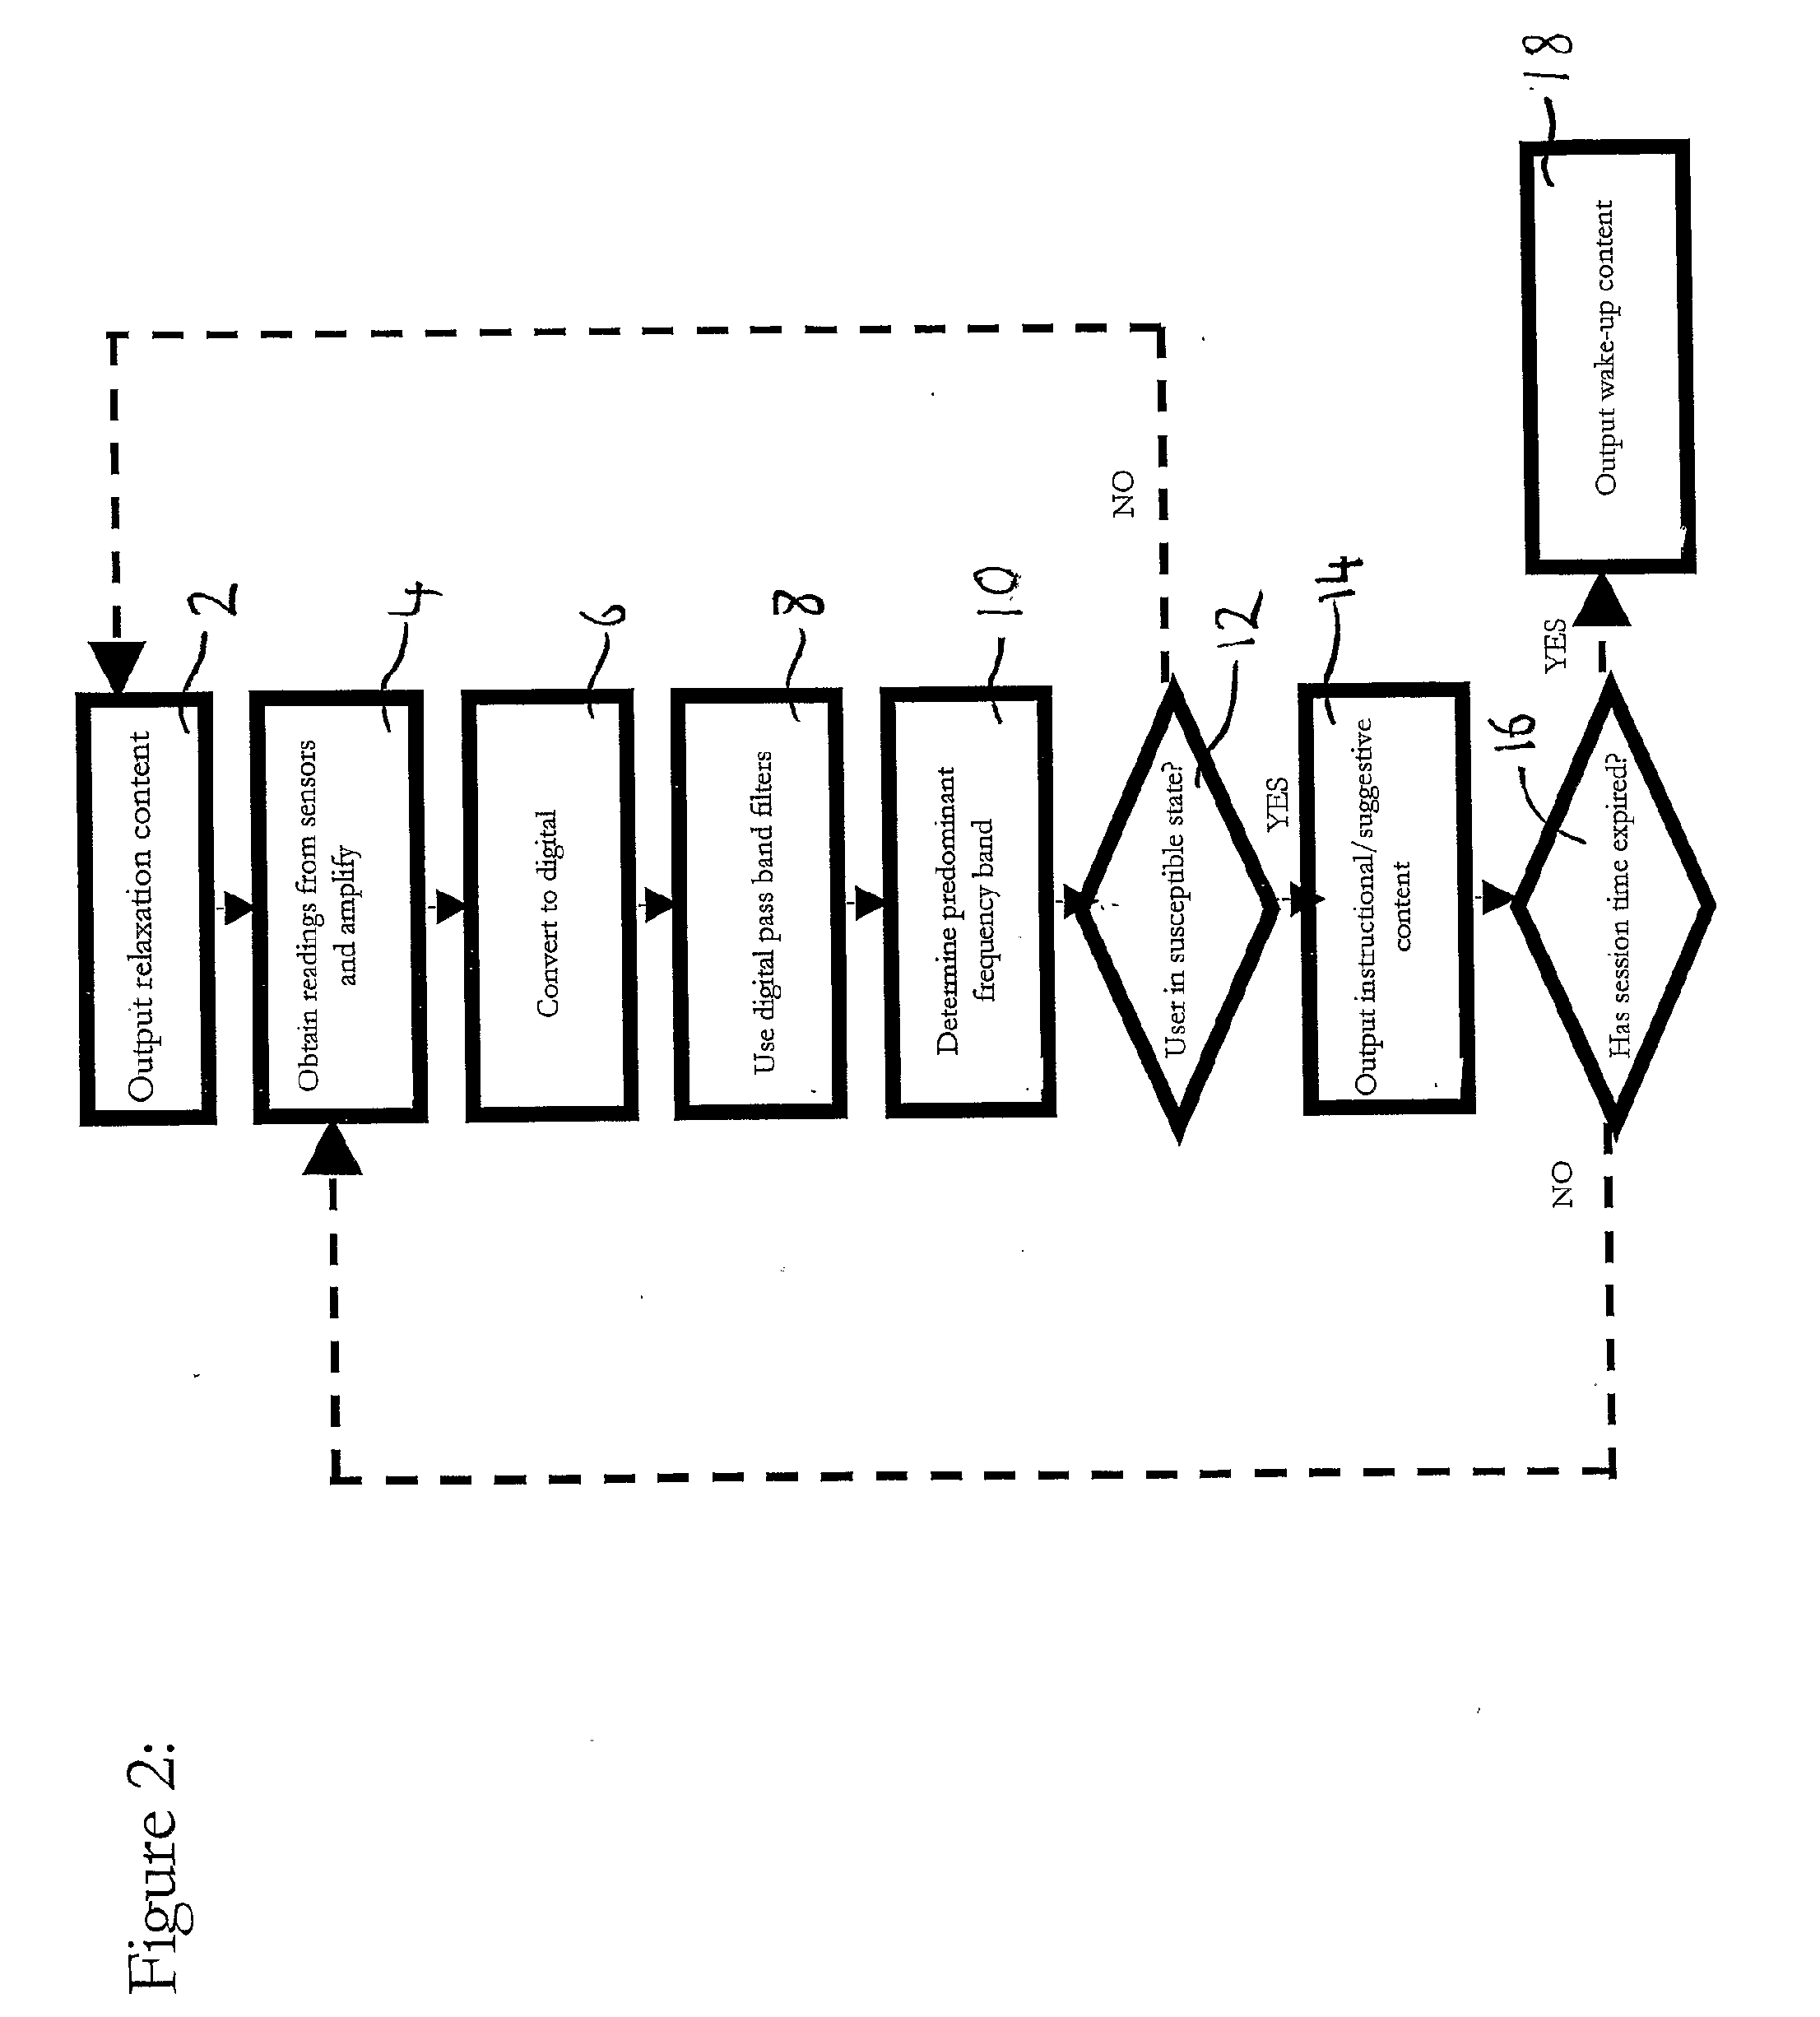 Medical Hypnosis Device For Controlling The Administration Of A Hypnosis Experience